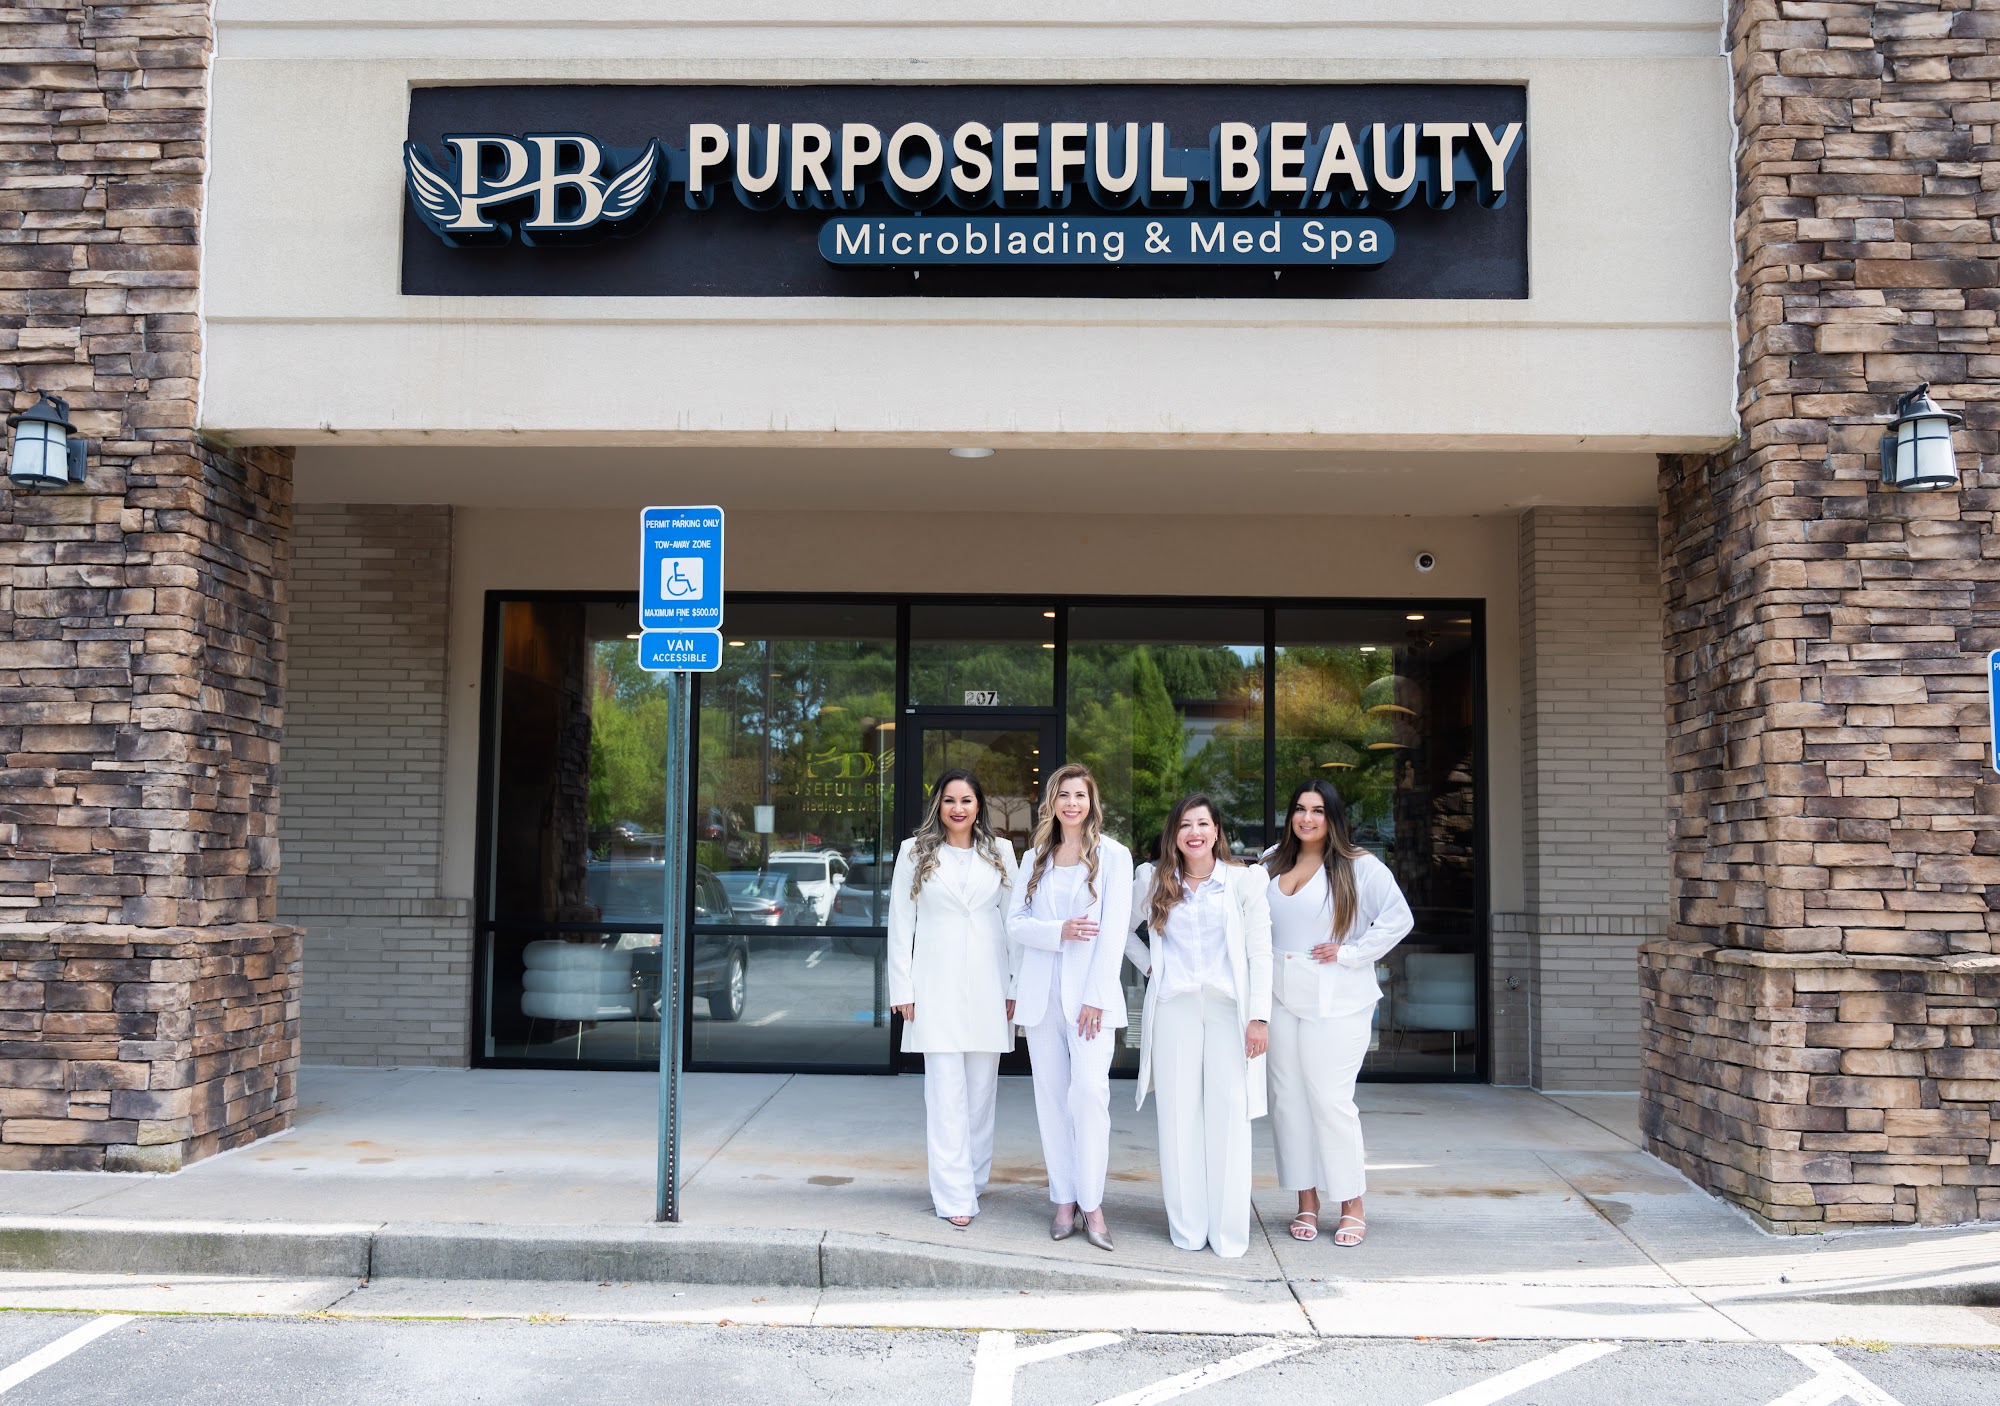 Purposeful Beauty Microblading & Med Spa